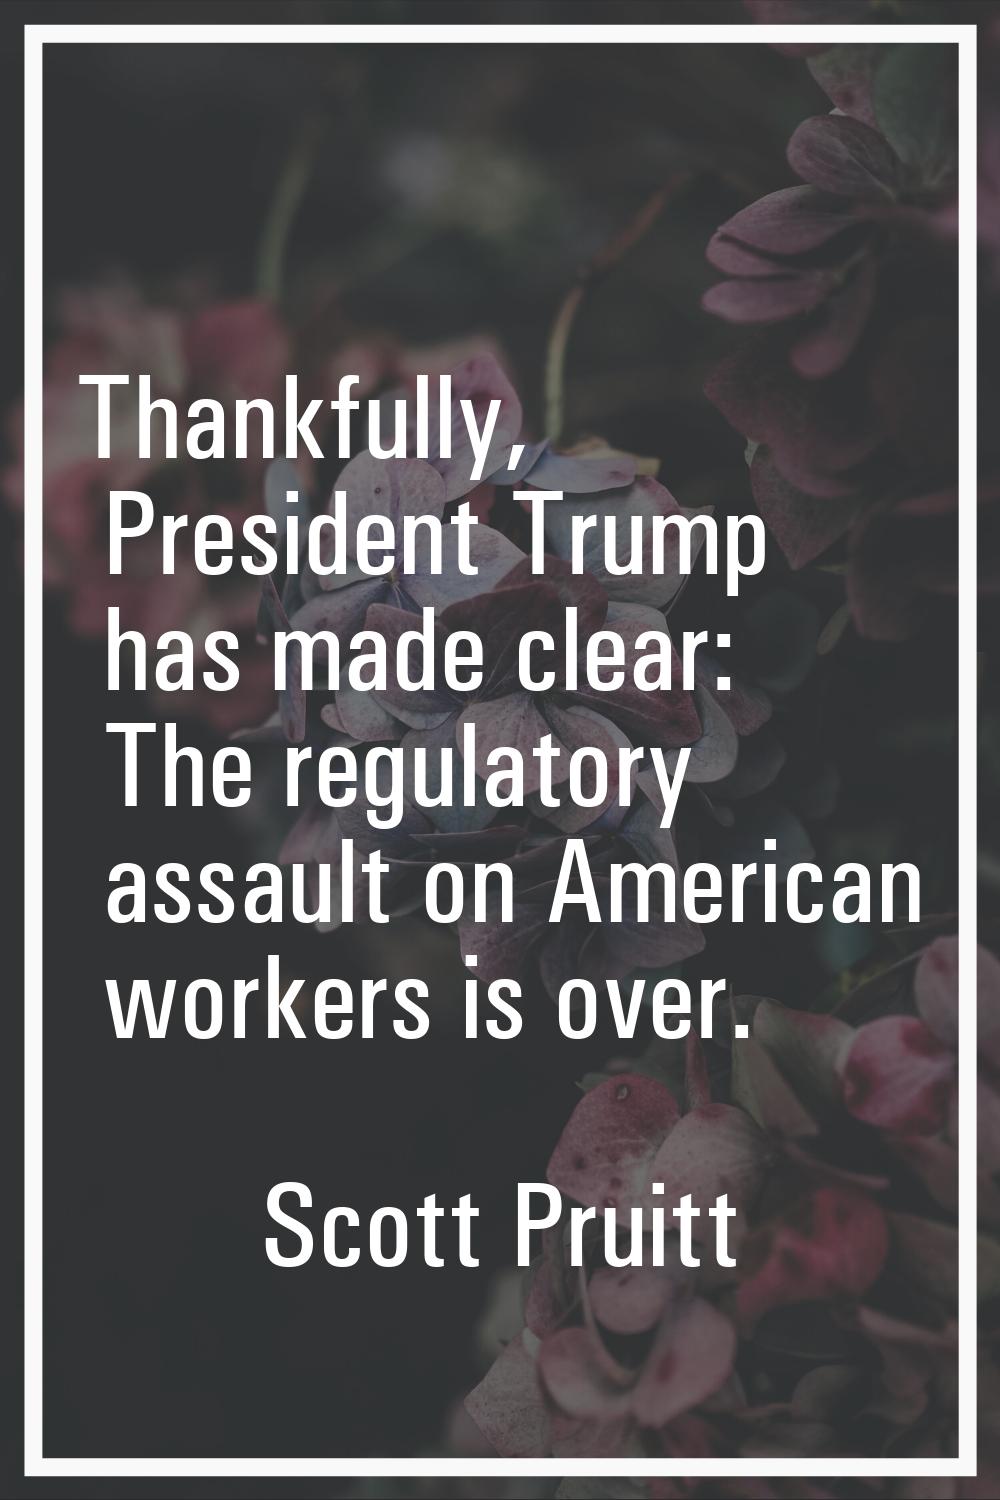 Thankfully, President Trump has made clear: The regulatory assault on American workers is over.